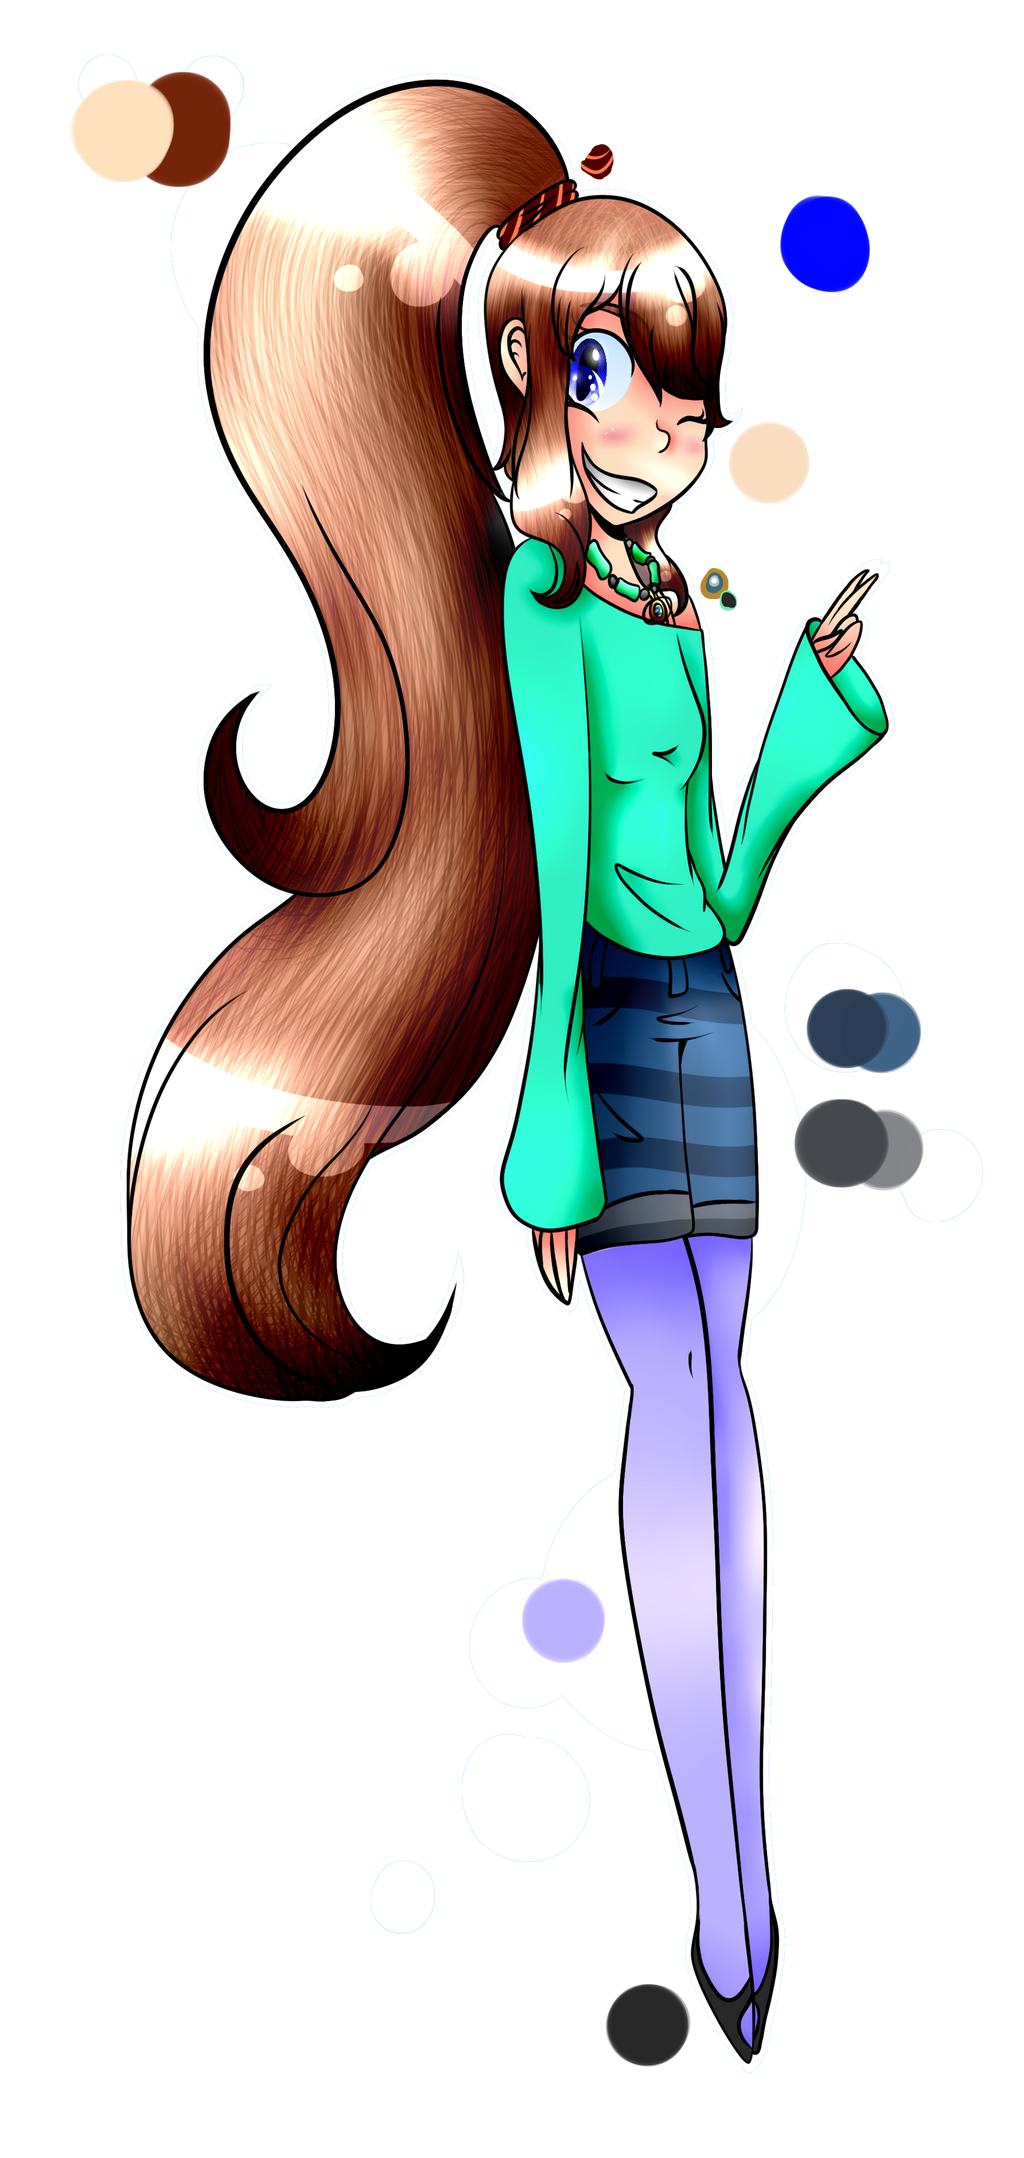 Roblox Oc Character By Mlpfluttershyx On Deviantart - roblox character girl with brown hair